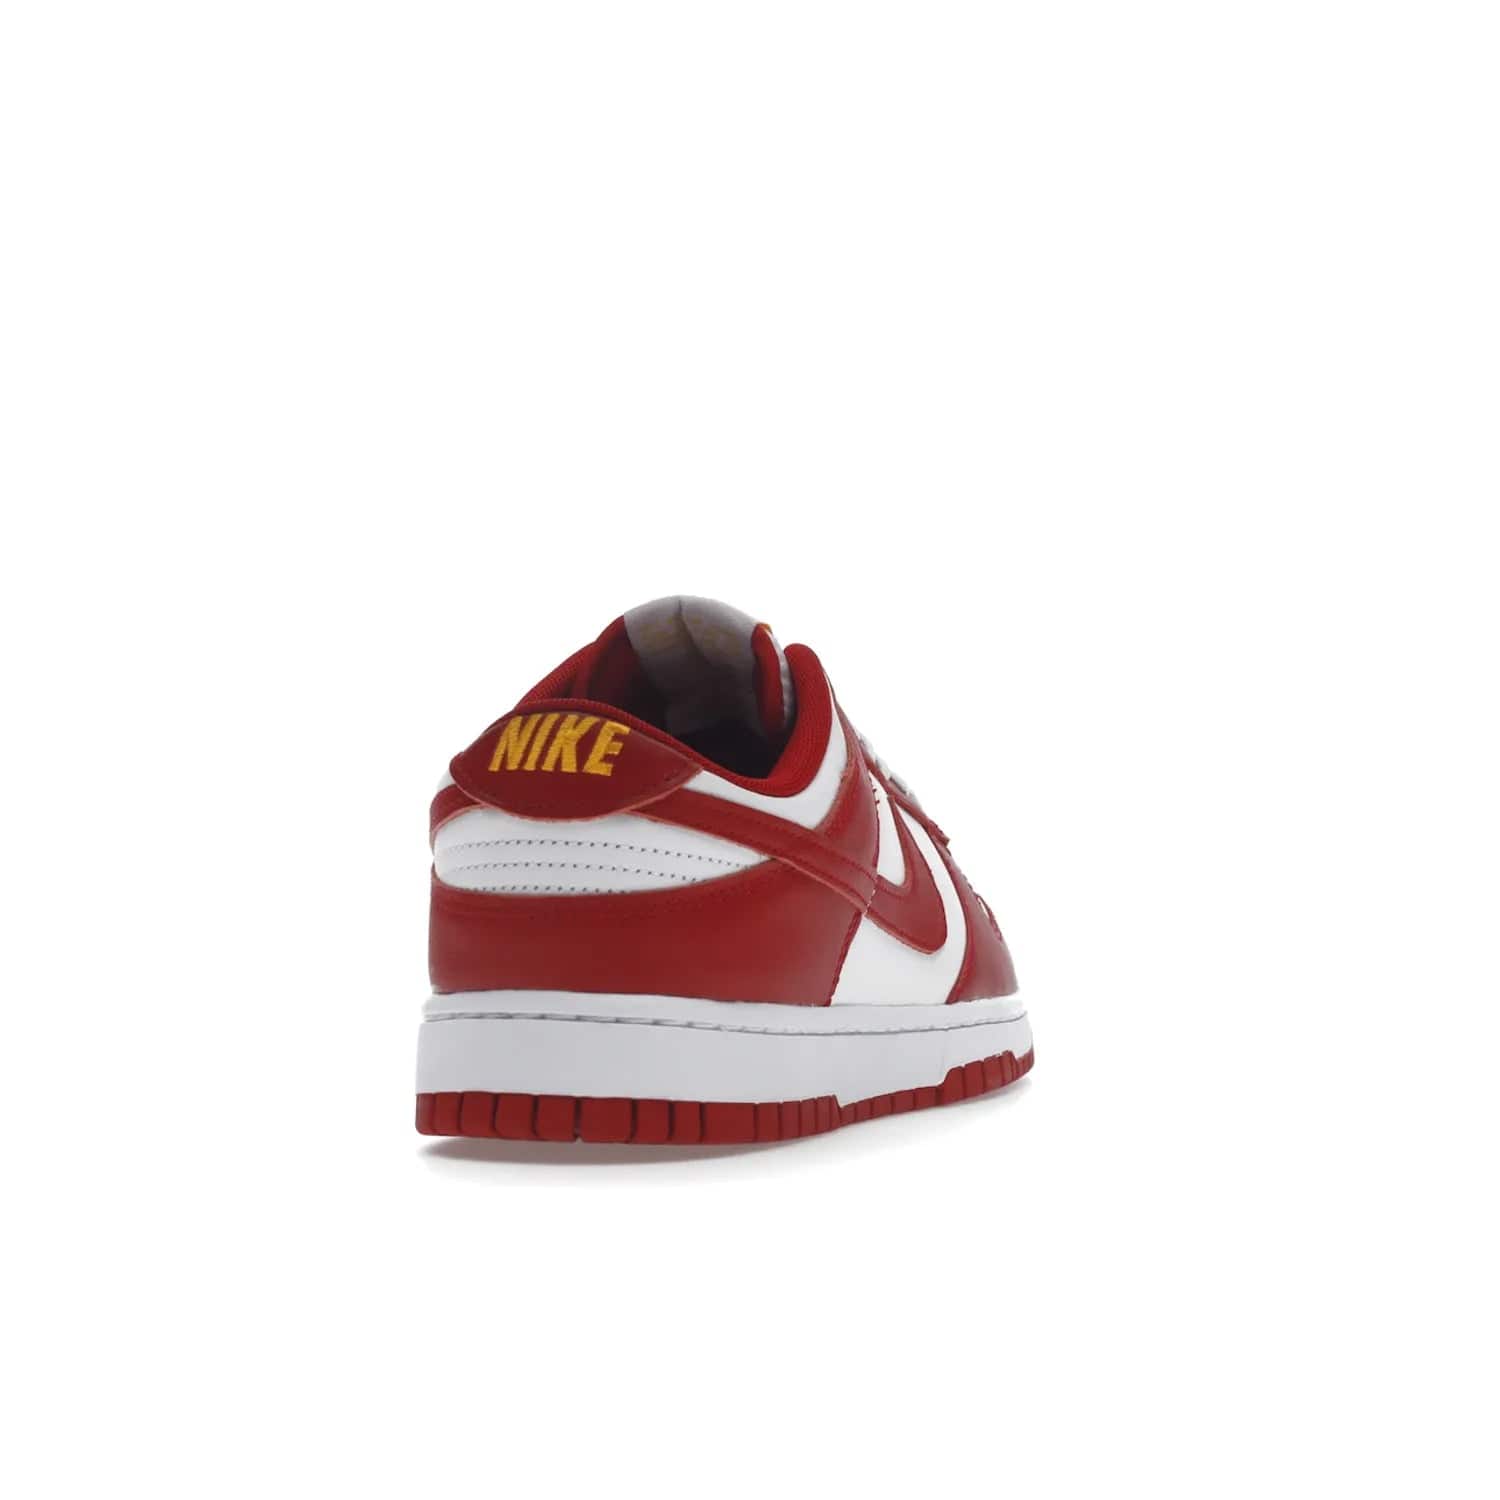 Nike Dunk Low USC - Image 30 - Only at www.BallersClubKickz.com - The Nike Dunk Low USC DD1391-602 colorway captures the eye of University of Southern California fans. Crafted with leather and rubber upper and outsole, this stylish sneaker features a white, gym red, and yellow colorway. With yellow Nike branding, white perforated vamp, and red suede Swoosh, this sneaker turns heads. Get the classic Nike Dunk Low USC releasing on November 9th, 2022.